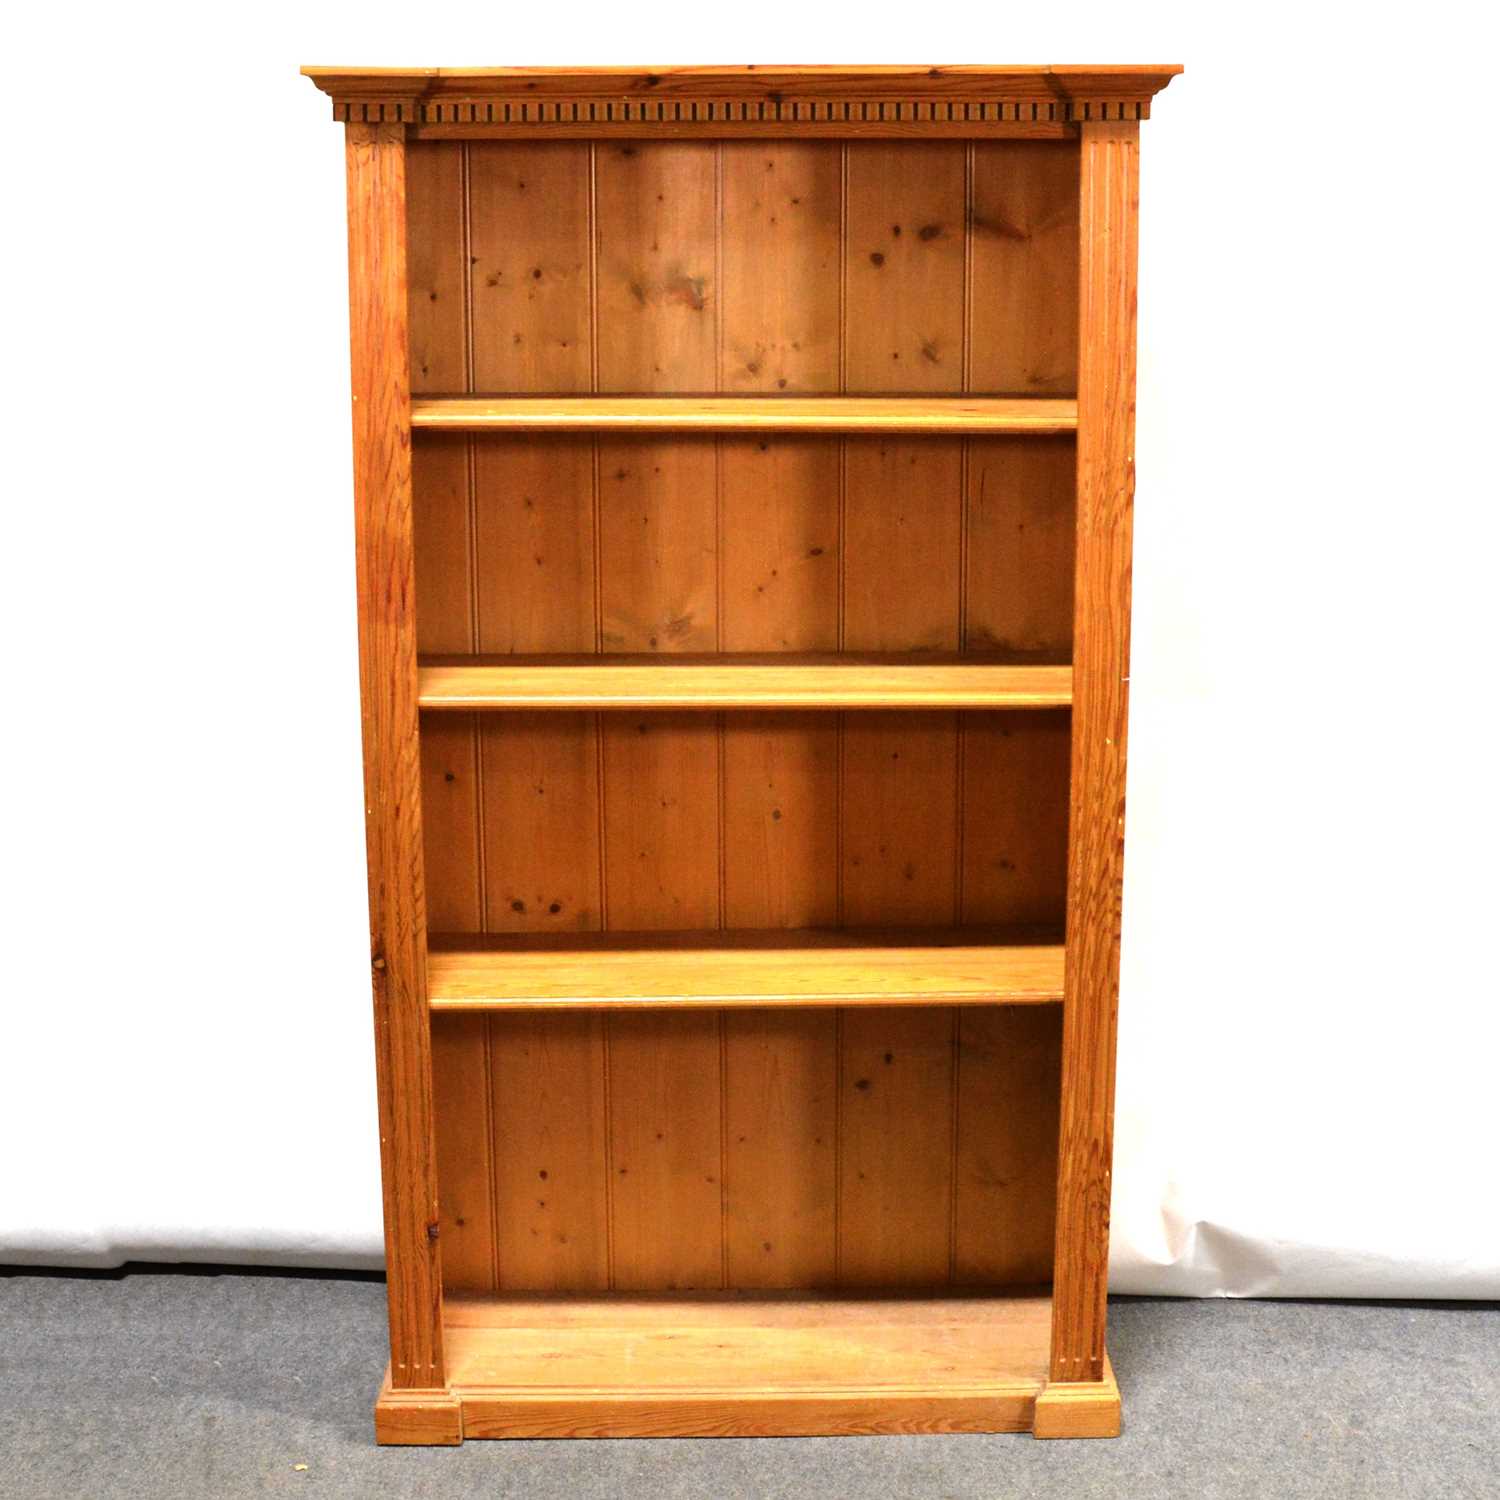 Three pine corner cupboards and an open bookcase